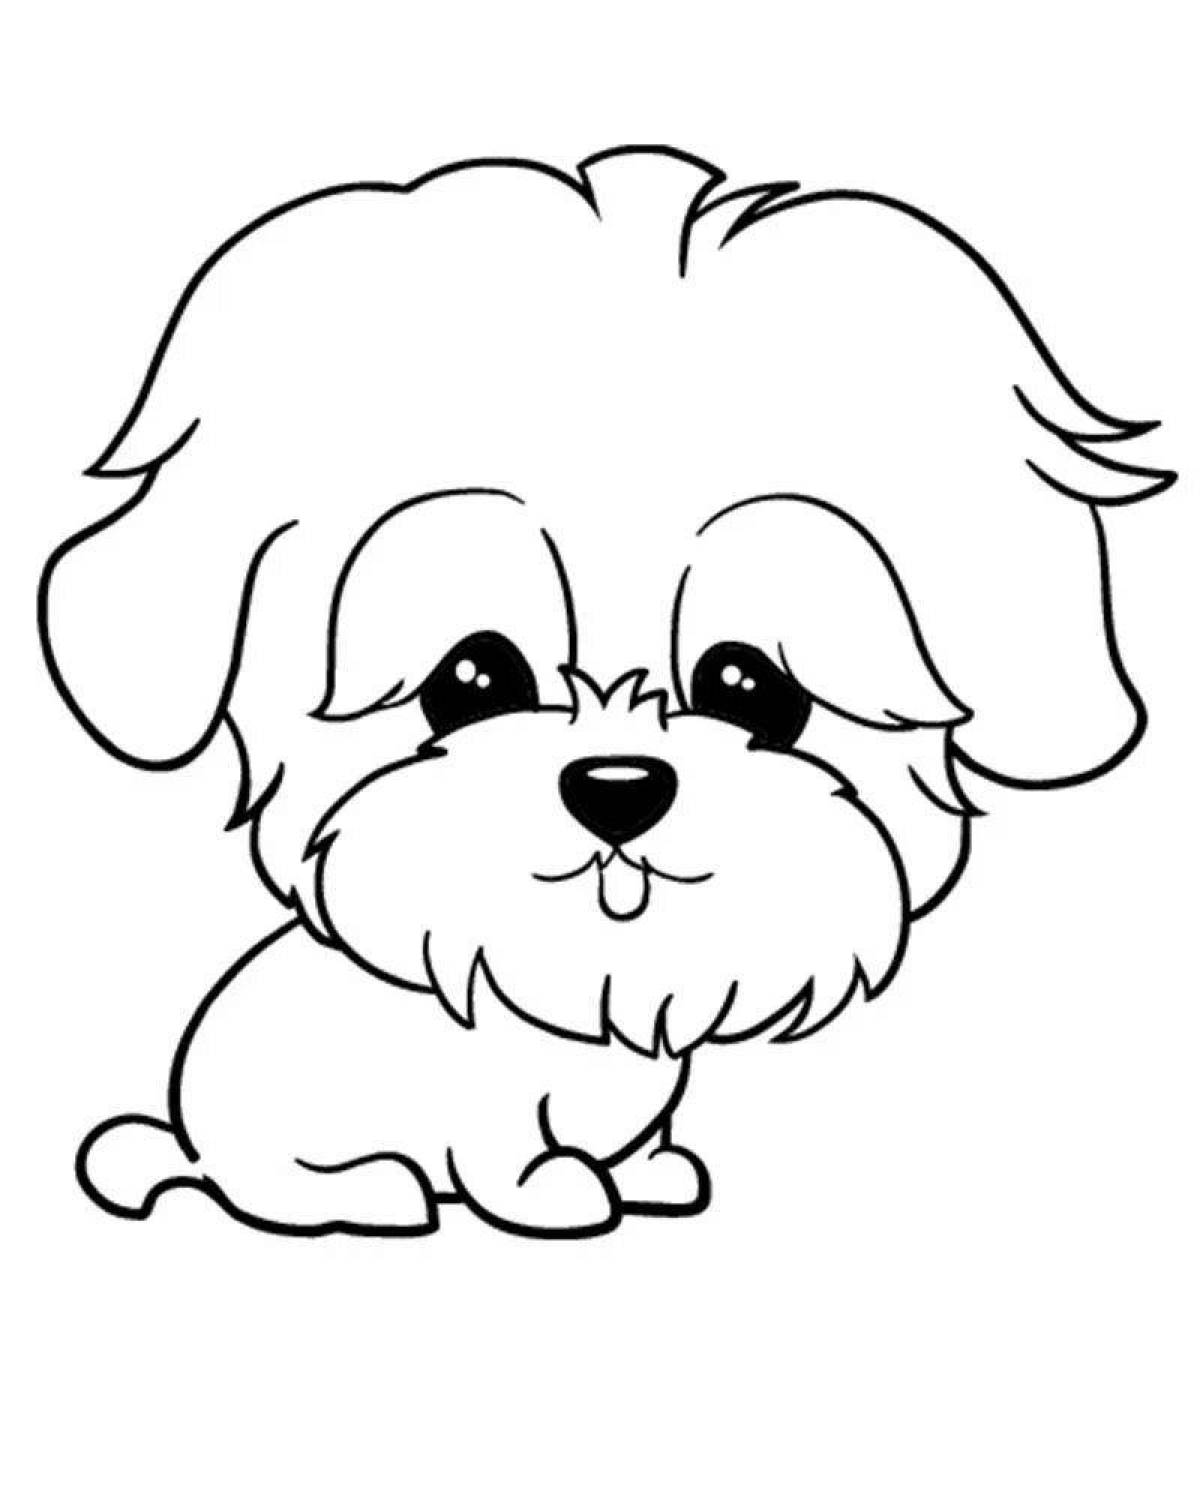 Cute cute dog coloring page